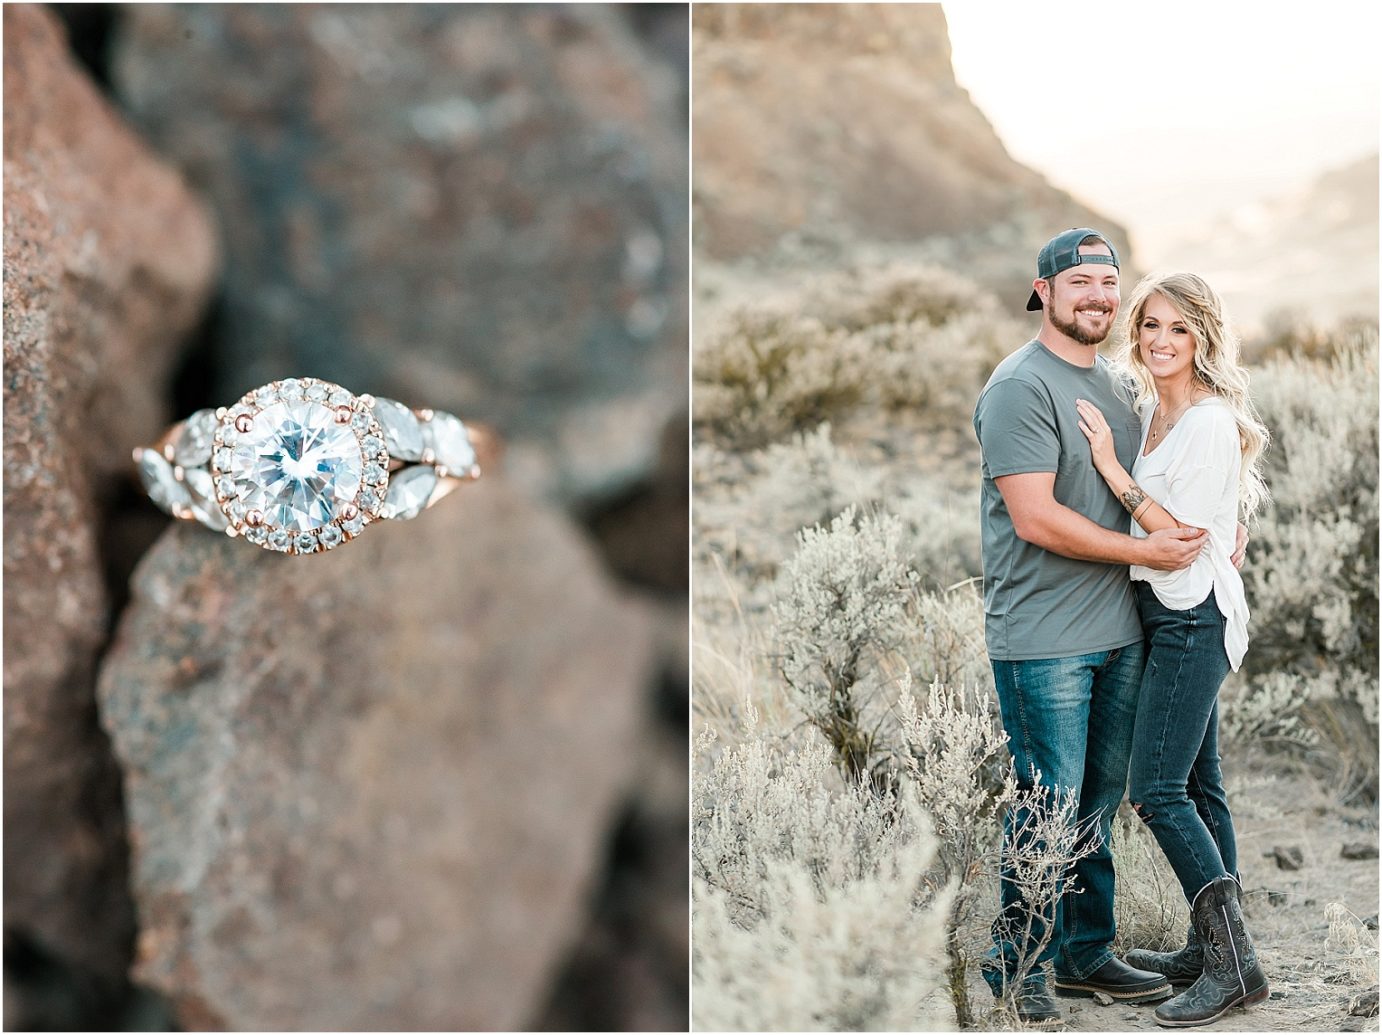 Frenchman Coulee Engagement Session Vantage WA Michael and Carley ring shot